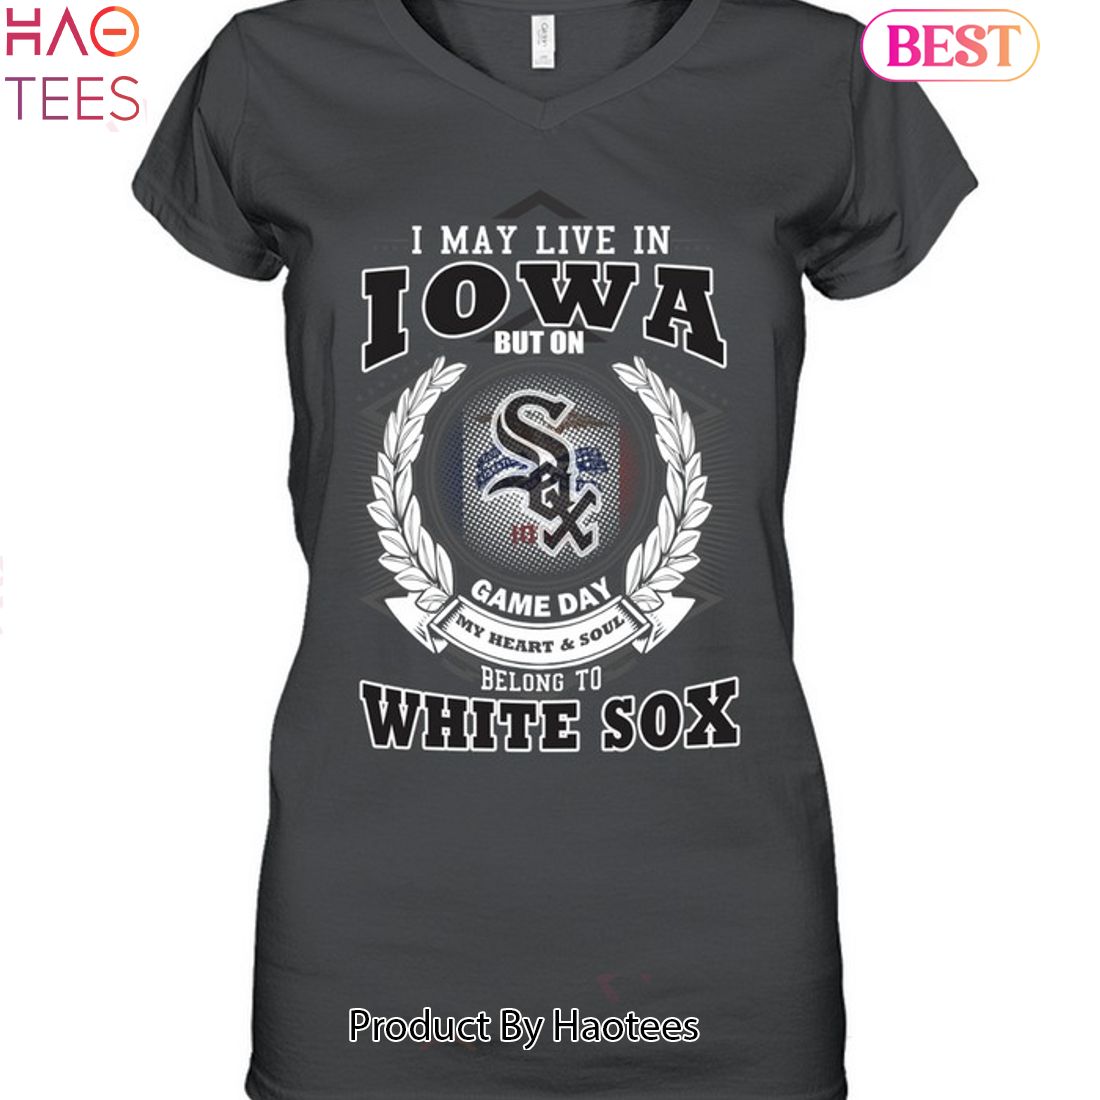 I May Live In Iowa Be Long To Chicago White Sox Unisex T-Shirt